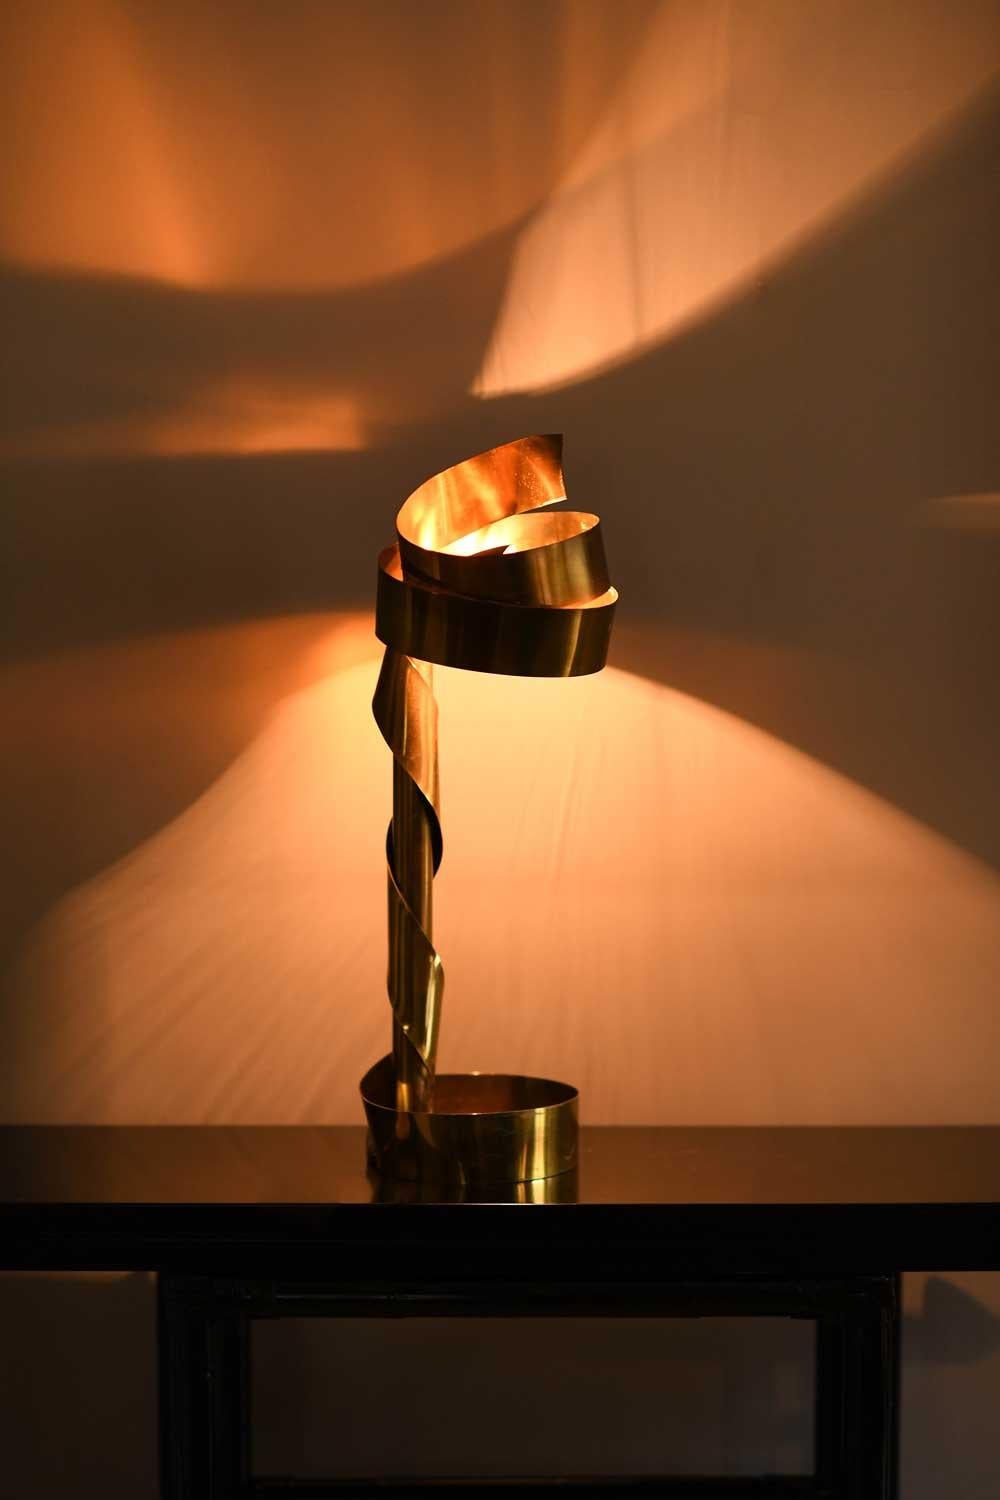 Brass lamp By Ferdinando Loffredo 1970
Lamp made with braided brass ribbon.
PRODUCT DETAILS
Dimensions: 23w x 65h x 23d cm
Materials: brass
Production: Italian manufacture 1970.